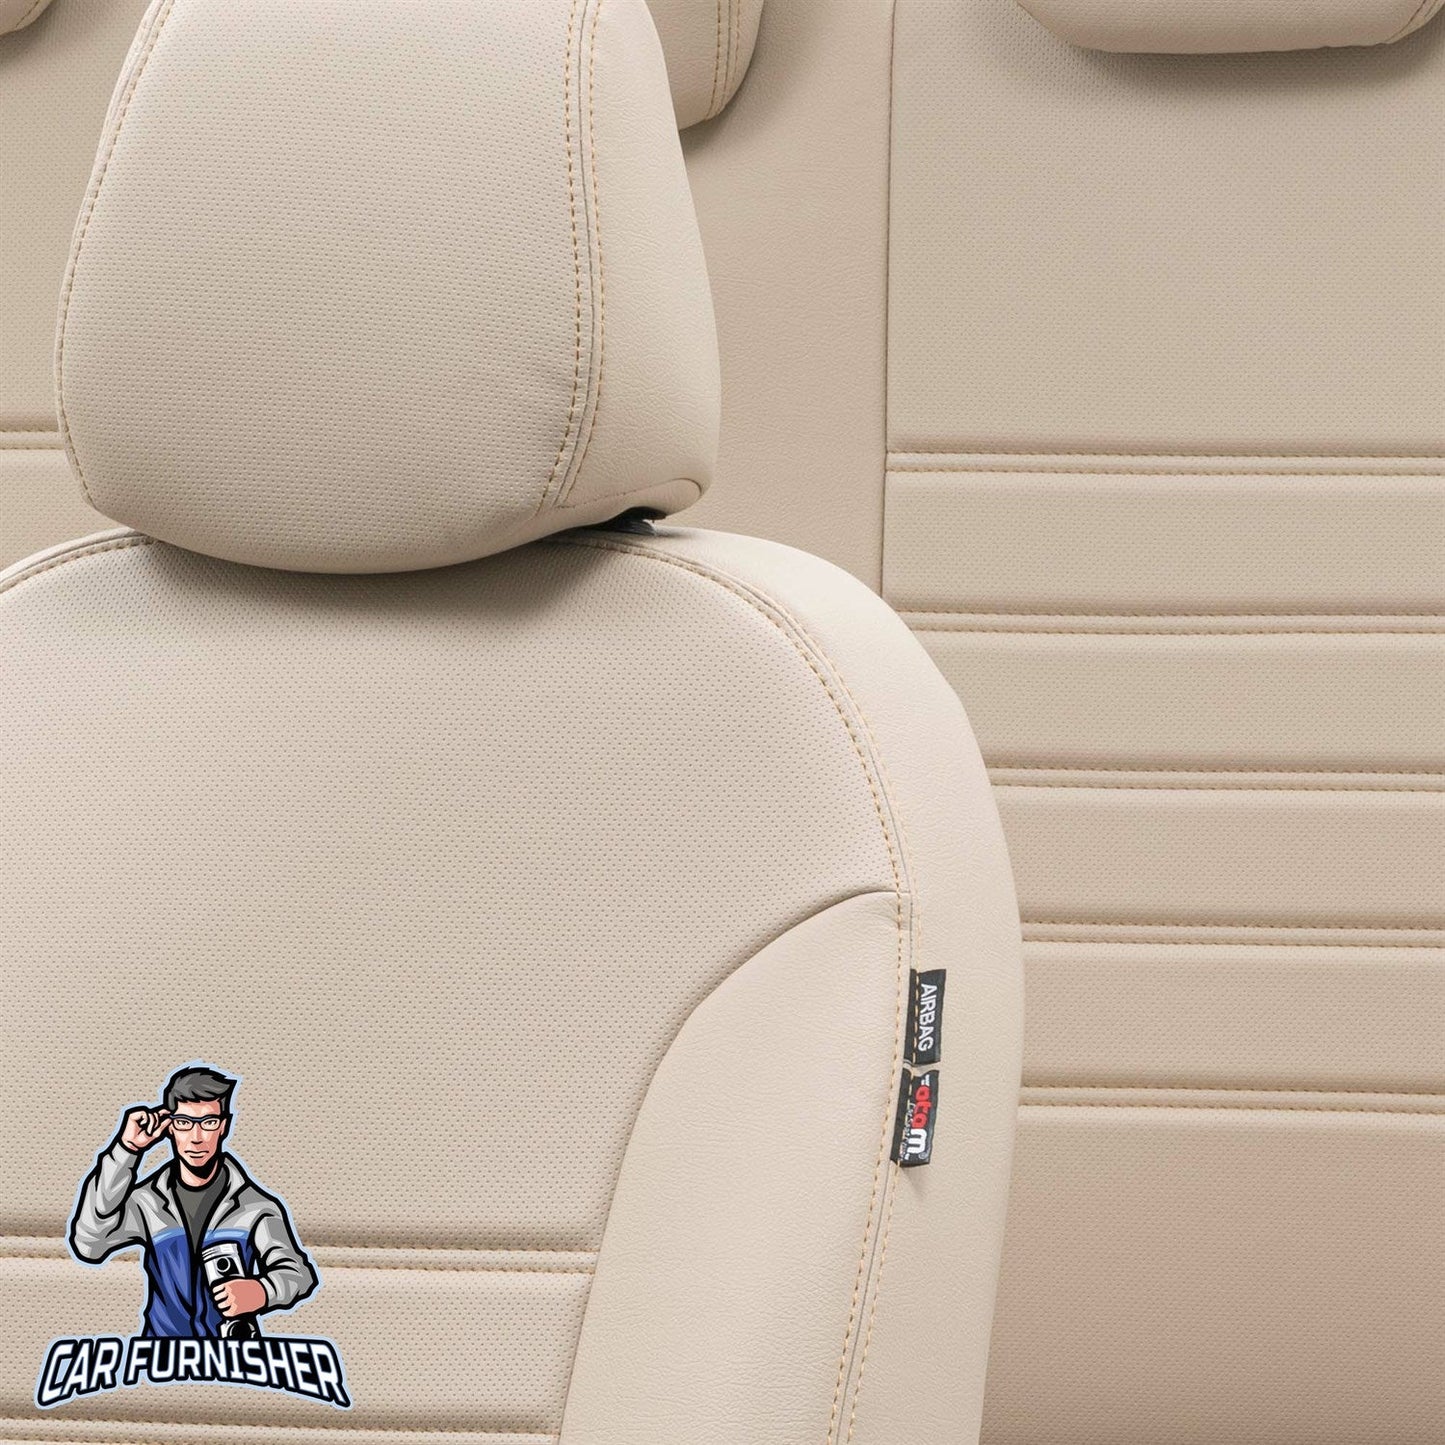 Volkswagen Jetta Seat Cover Istanbul Leather Design Beige Leather